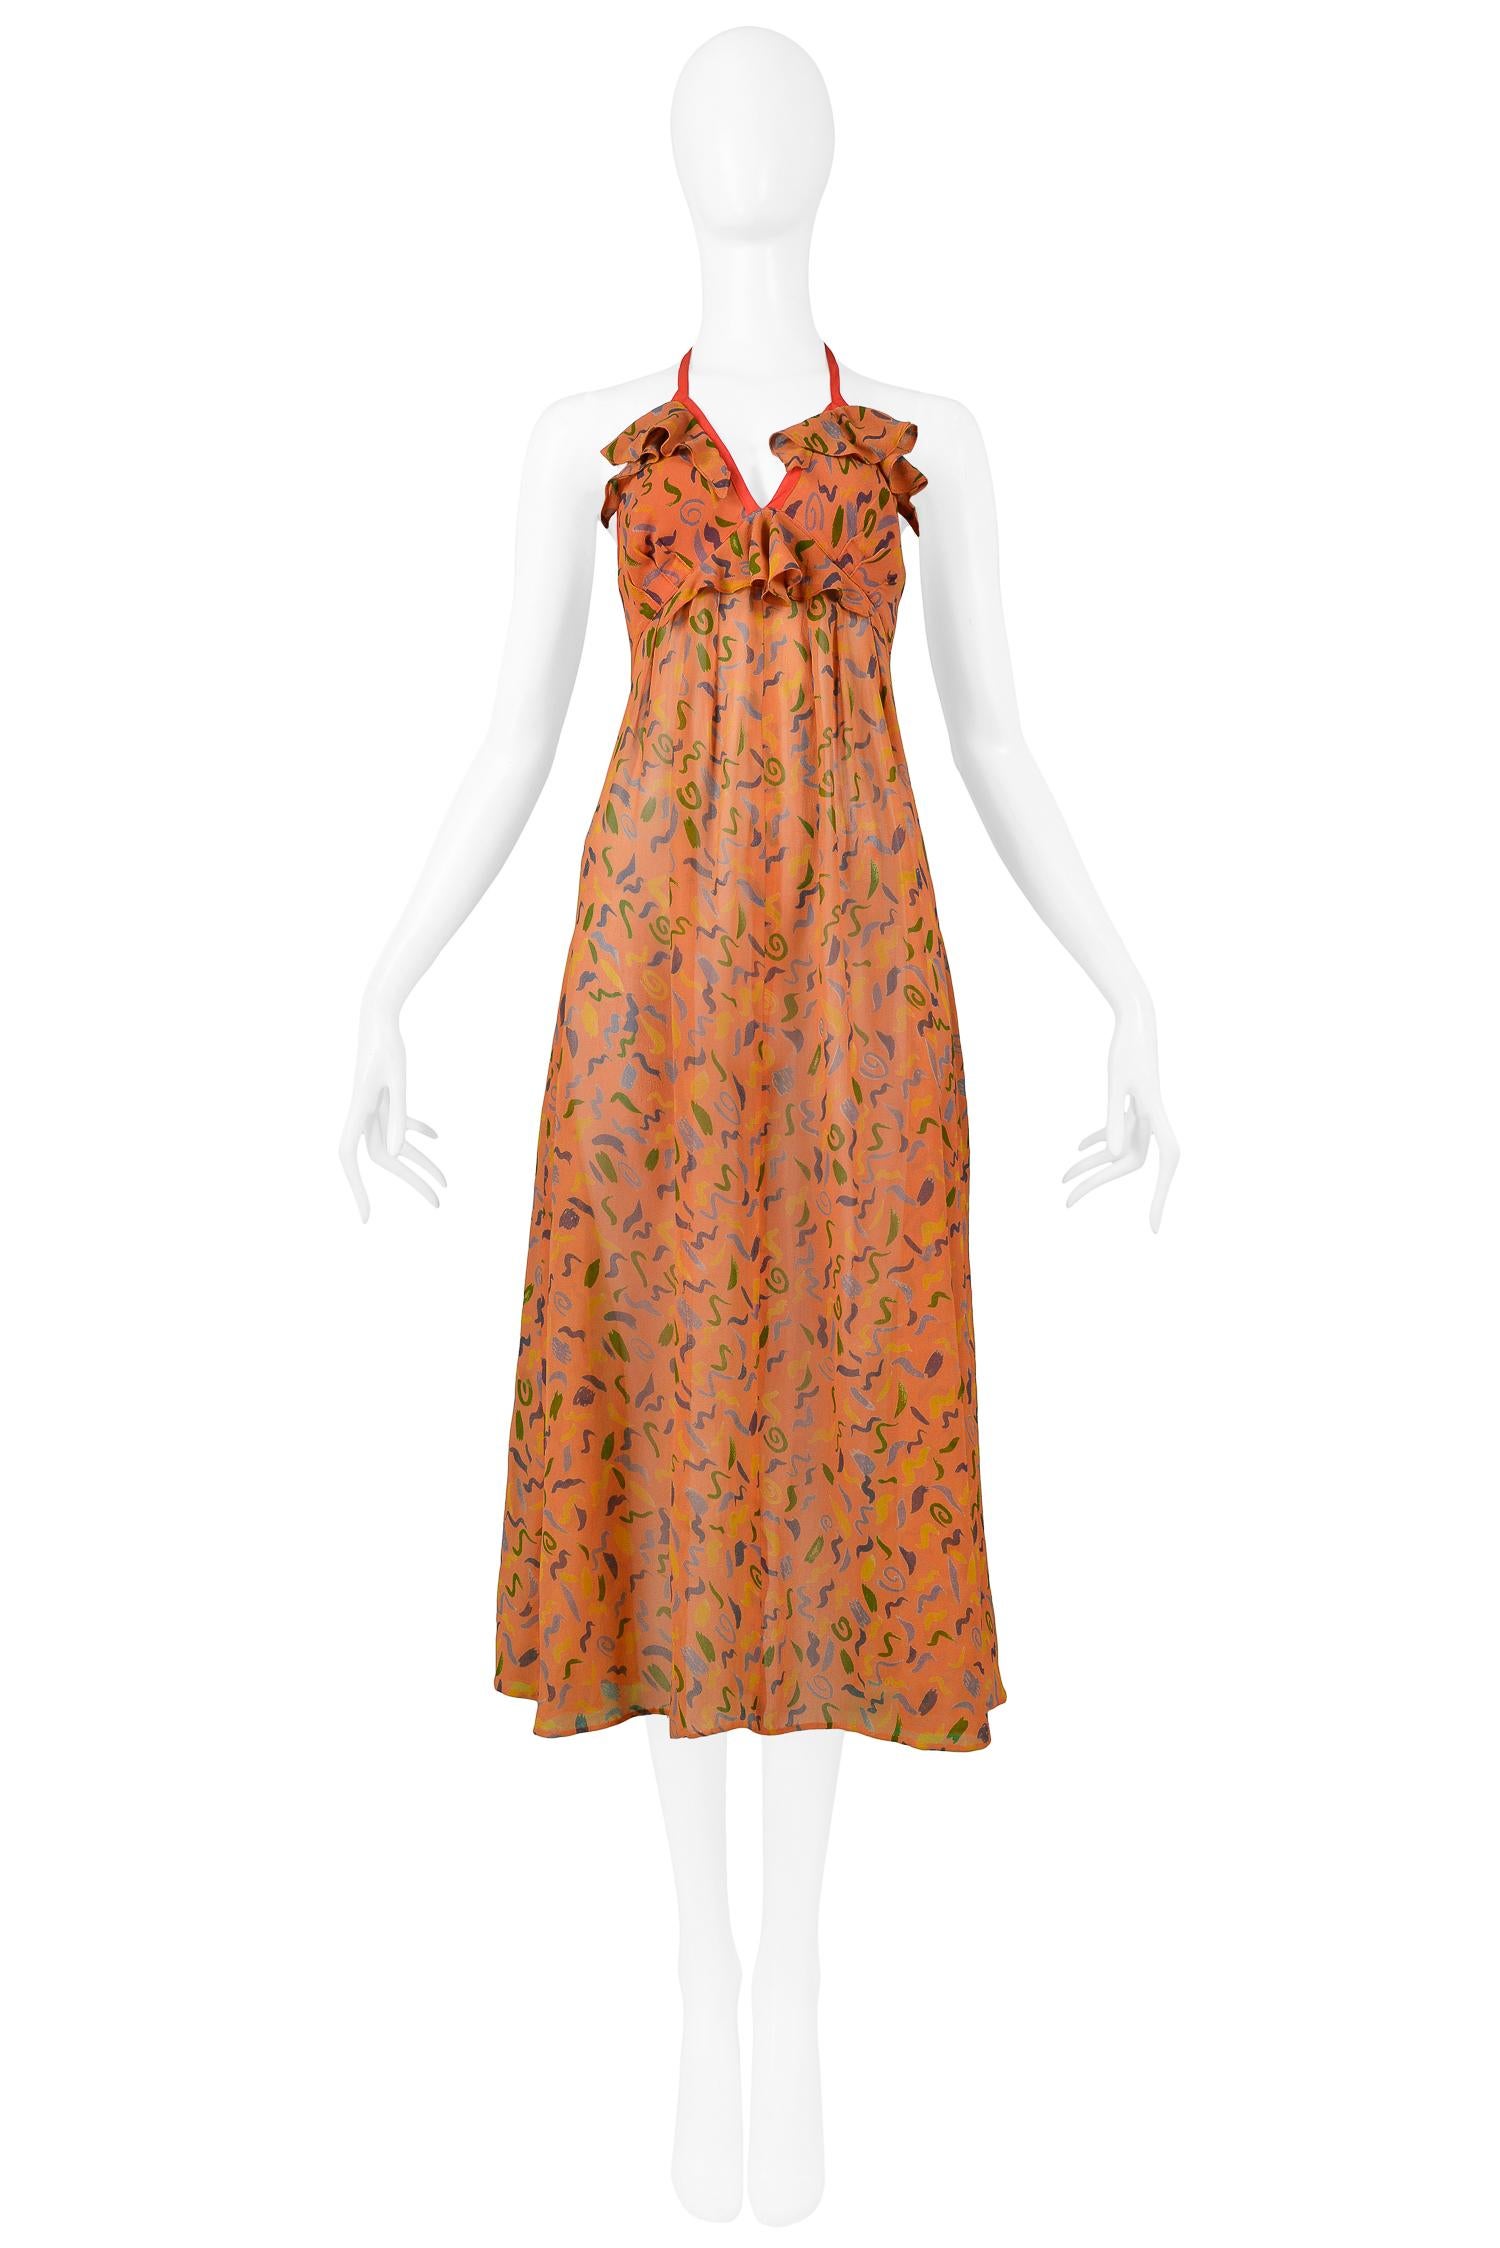 Vintage Ossie Clark orange moss crepe rayon halter dress with Celia Birtwell abstract print, ruffle bodice, center back zipper, neck tie, and red trim. Circa 1970. 

Good Vintage Condition.

Size: Fits like a today's size small.

Measurements: 
Bust